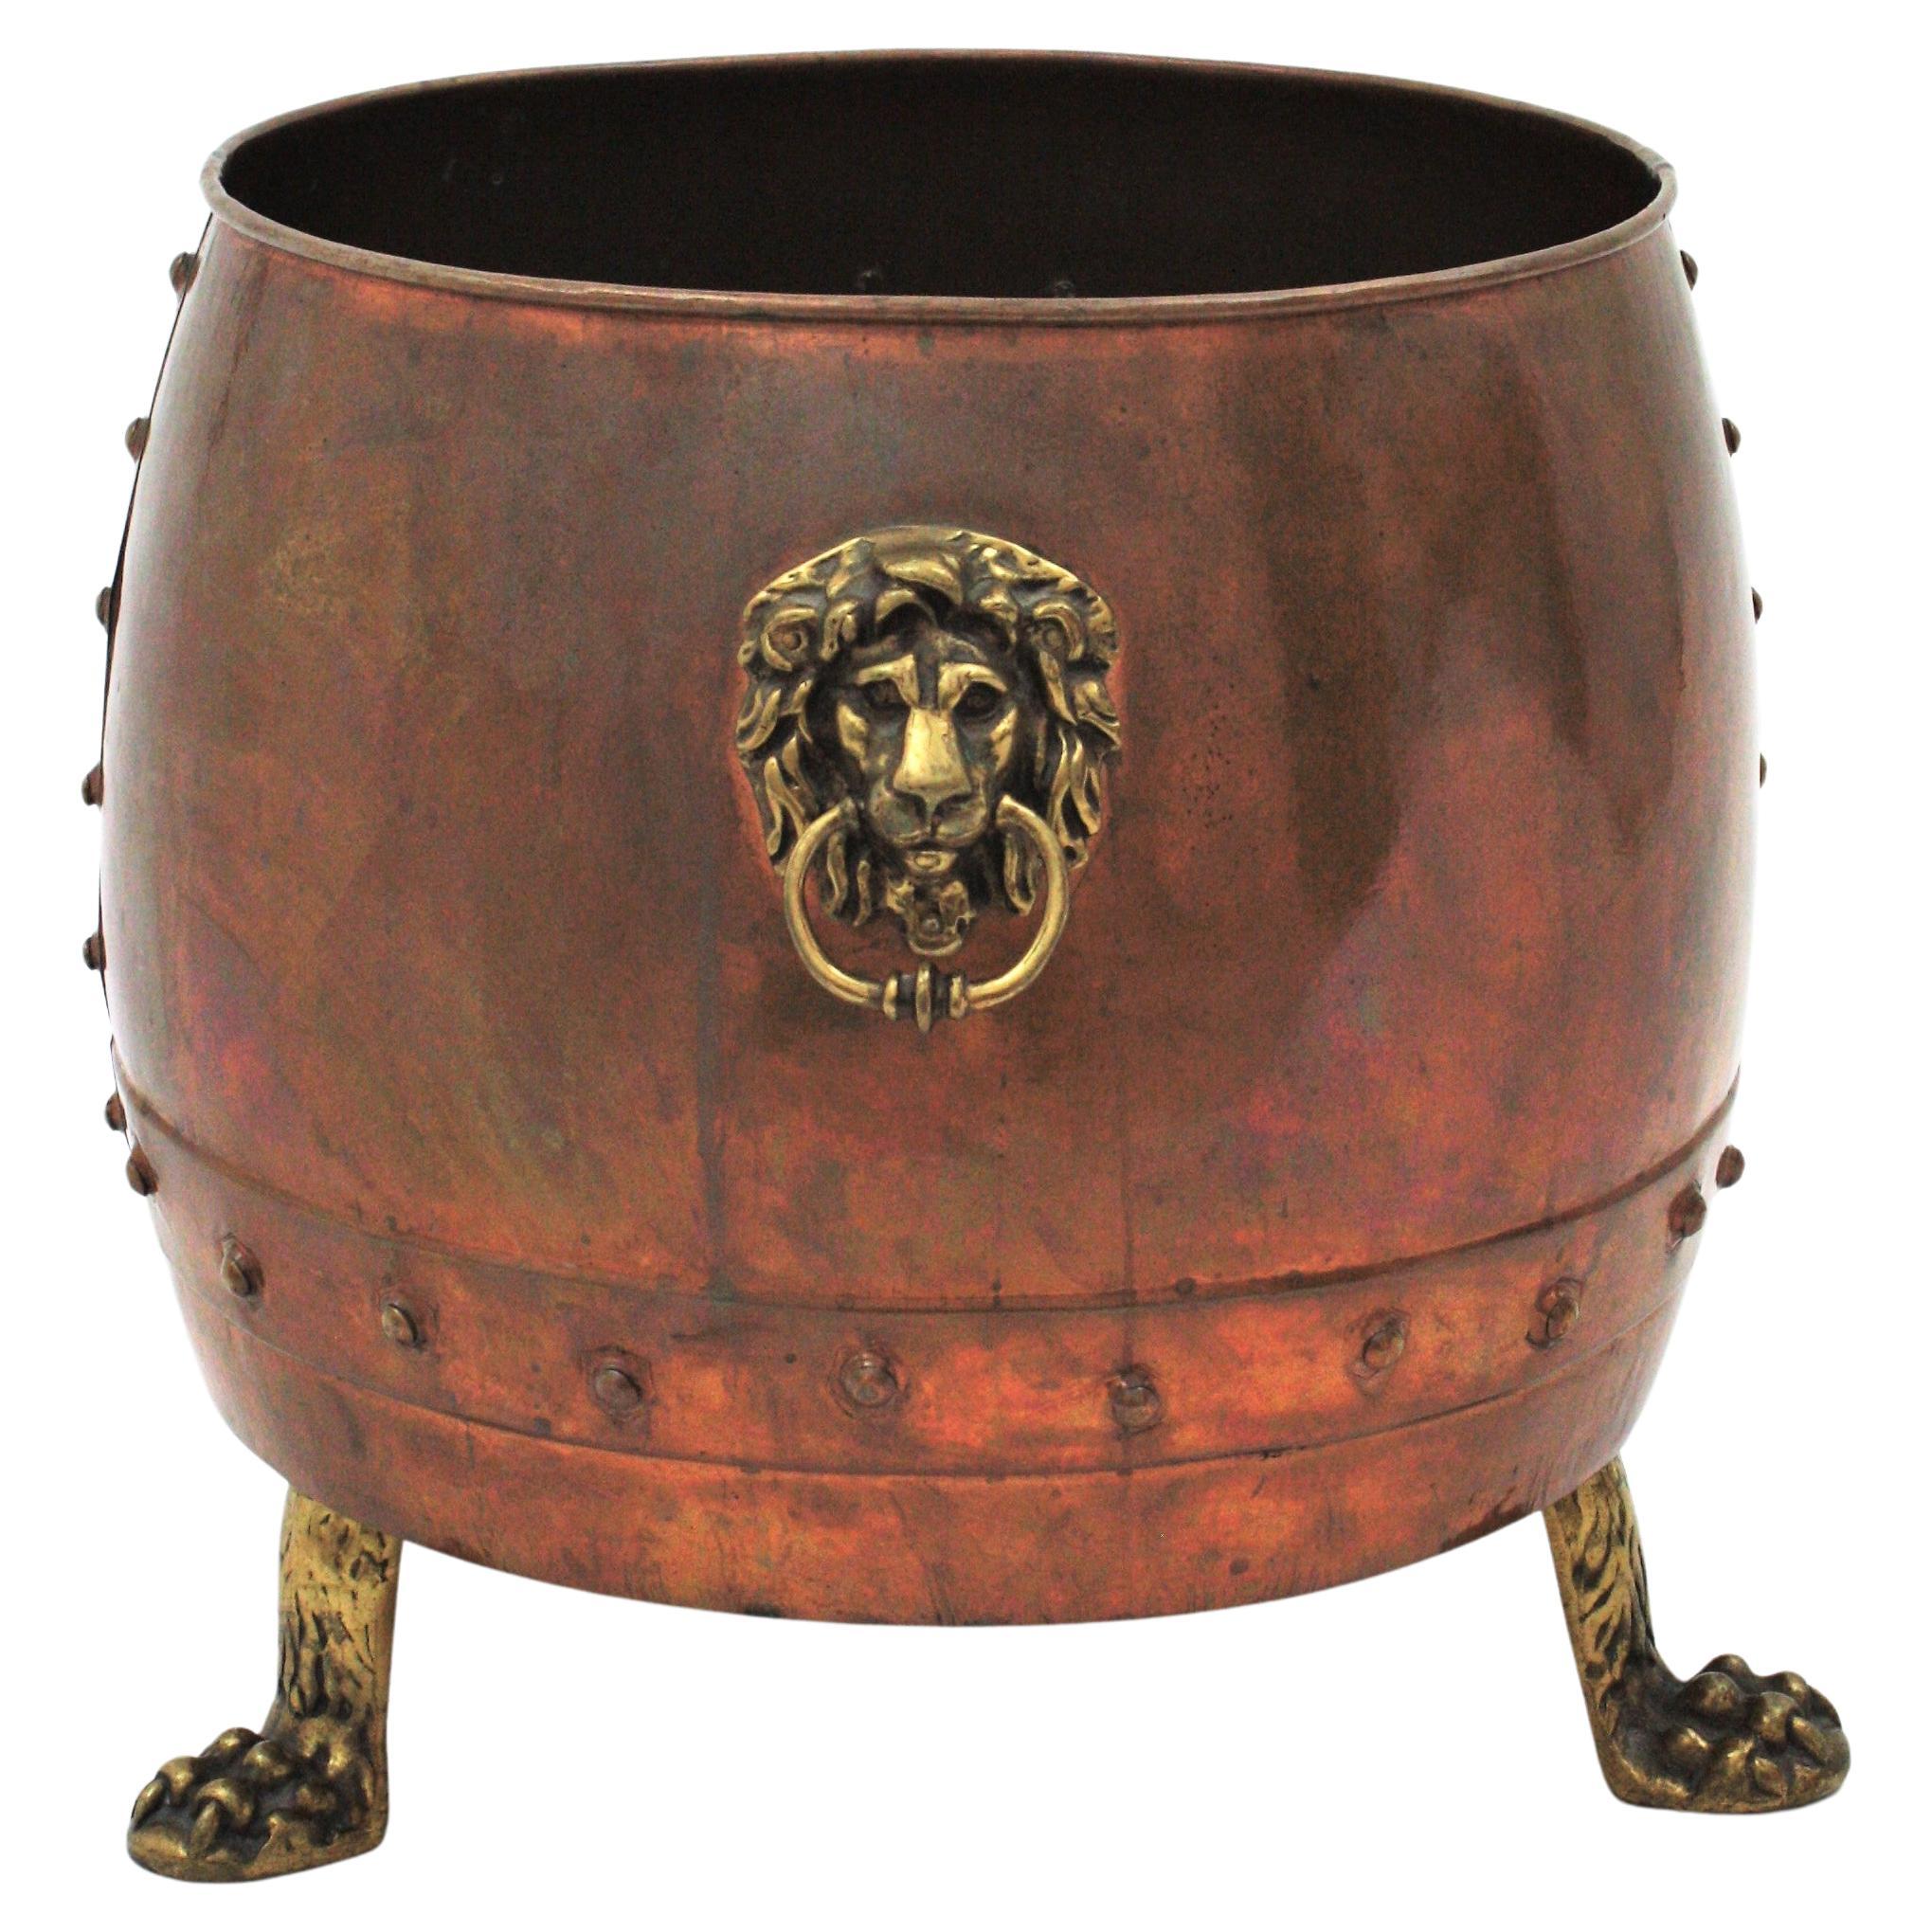 Large French copper and bronze cachepot / jardiniere or log bin with lions head handles and tripod paw feet. 
This hand-hammered copper cauldron has copper studs and it has a terrific aged patina. It is supported by tripod paw feet. At both sides it